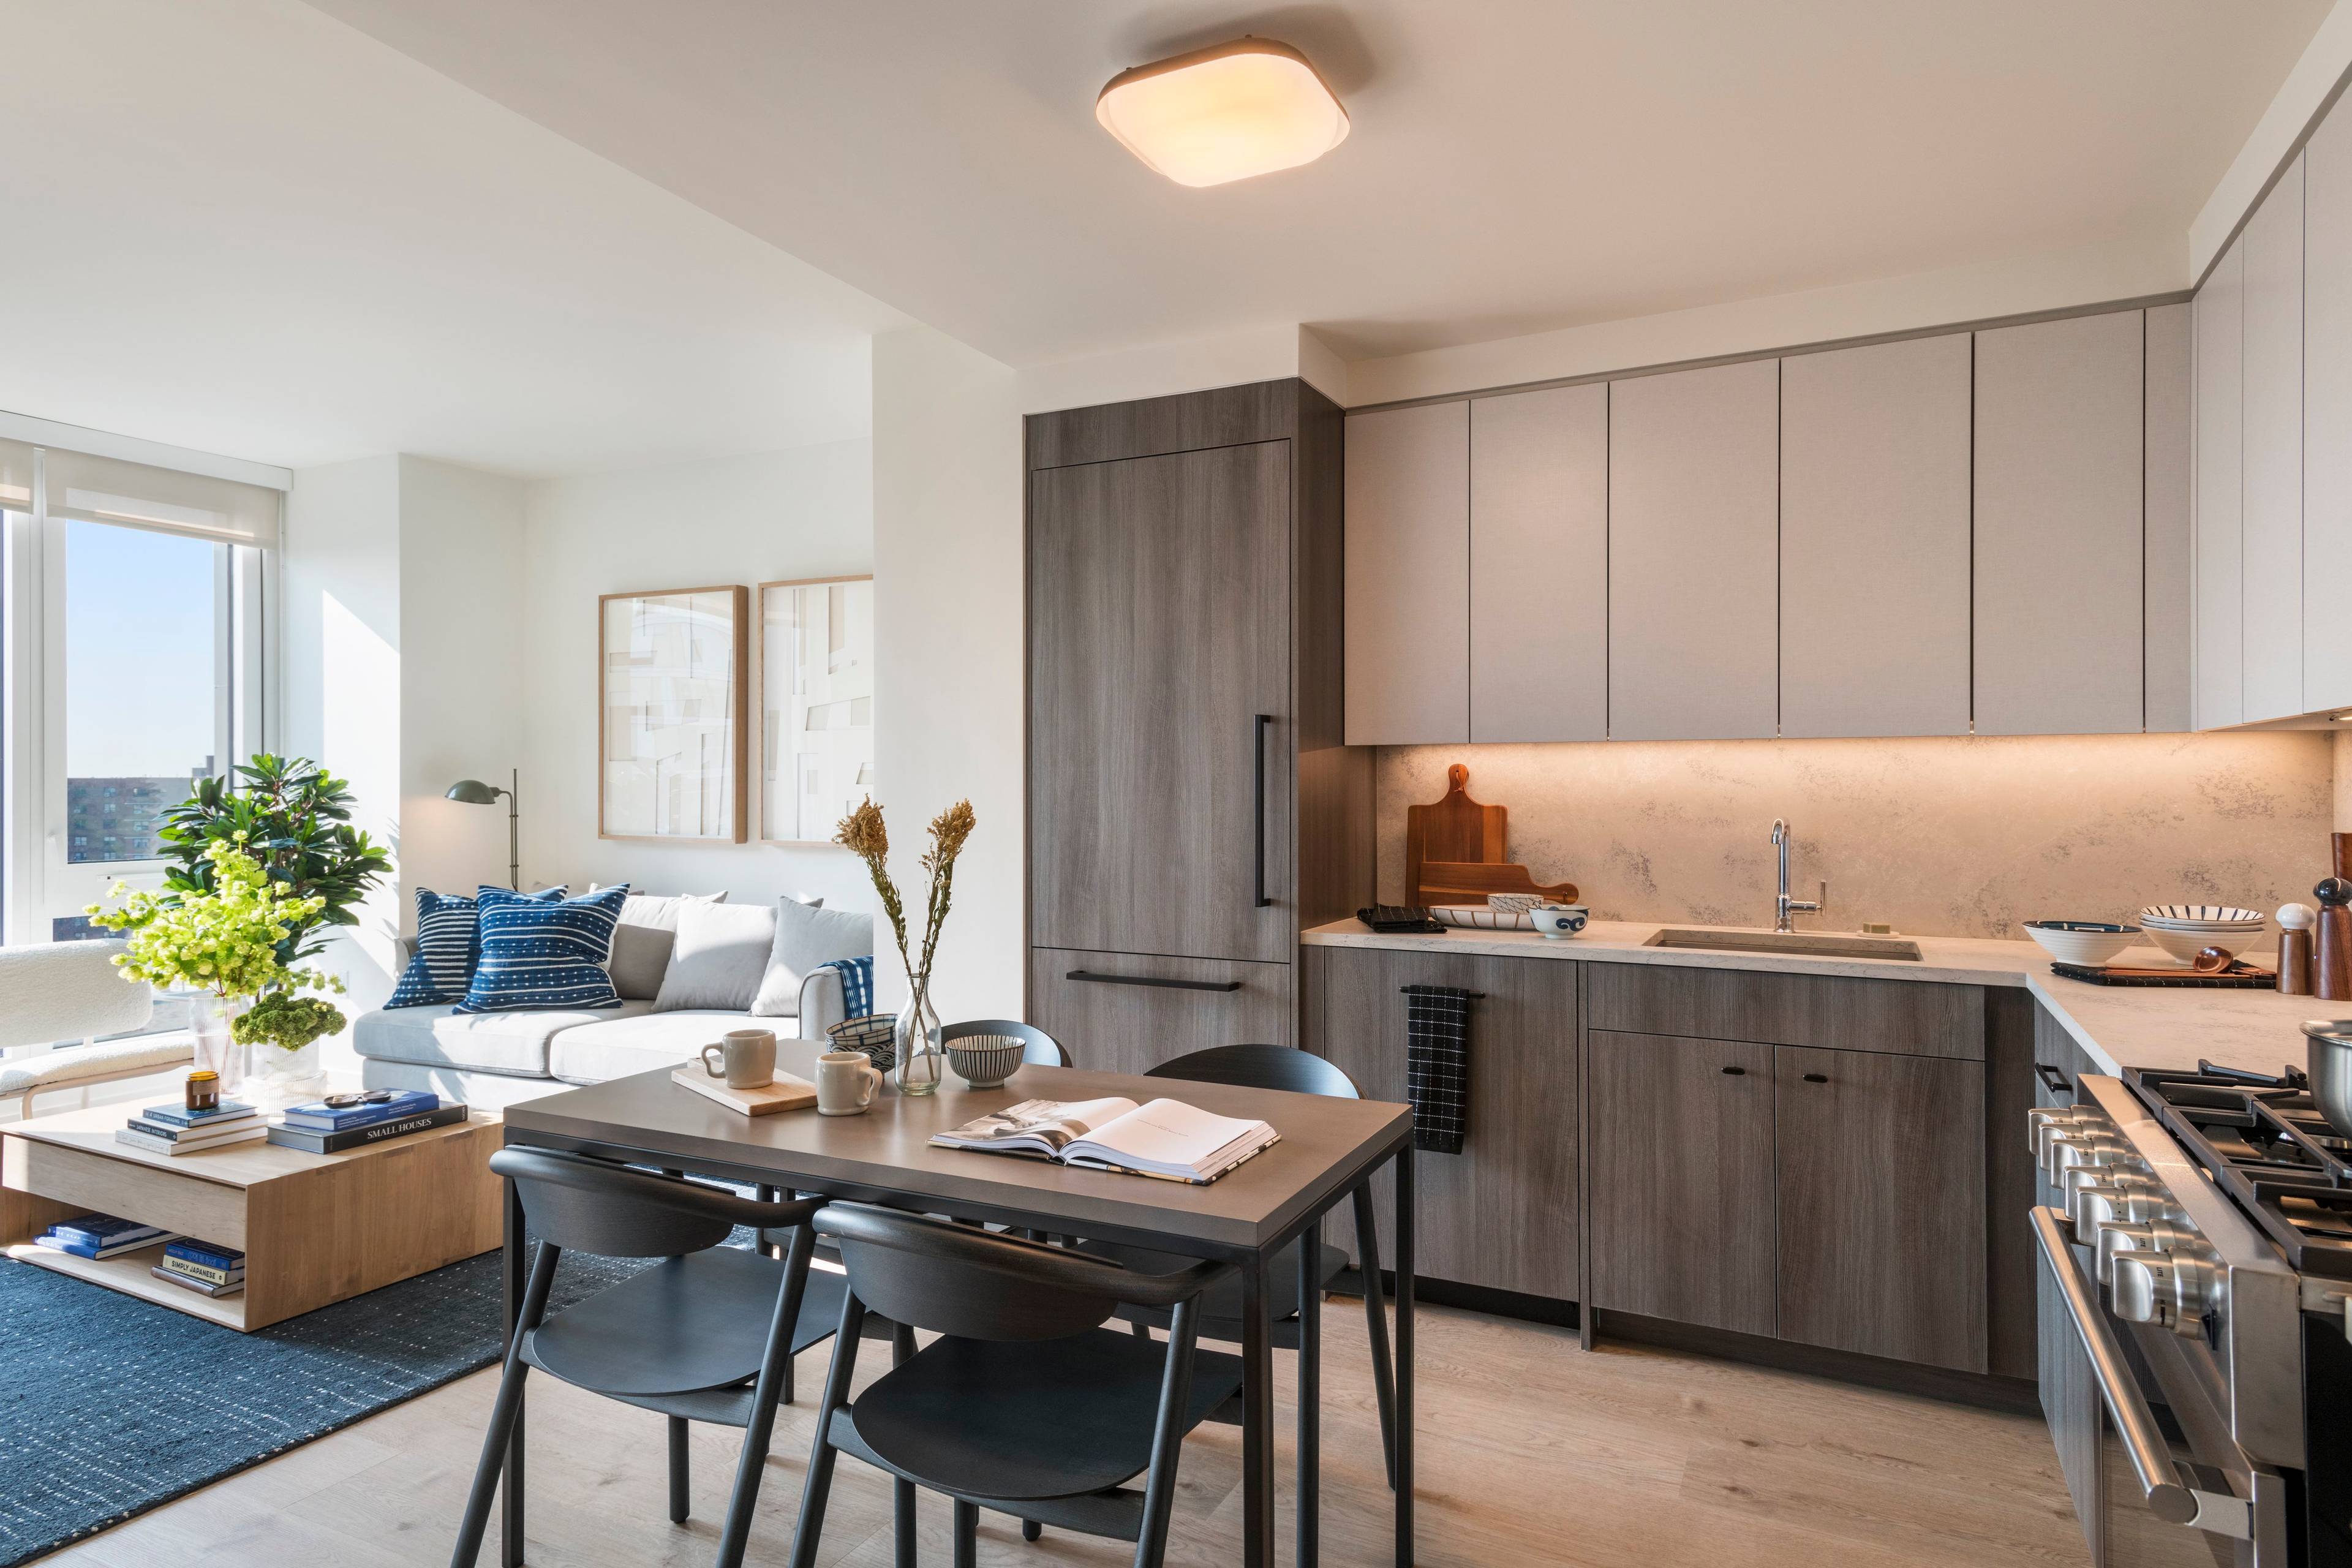 The Suffolk is a new, full service luxury rental building that is eclectic yet refined, elevated yet grounded, always with new moments and hidden gems to discover.